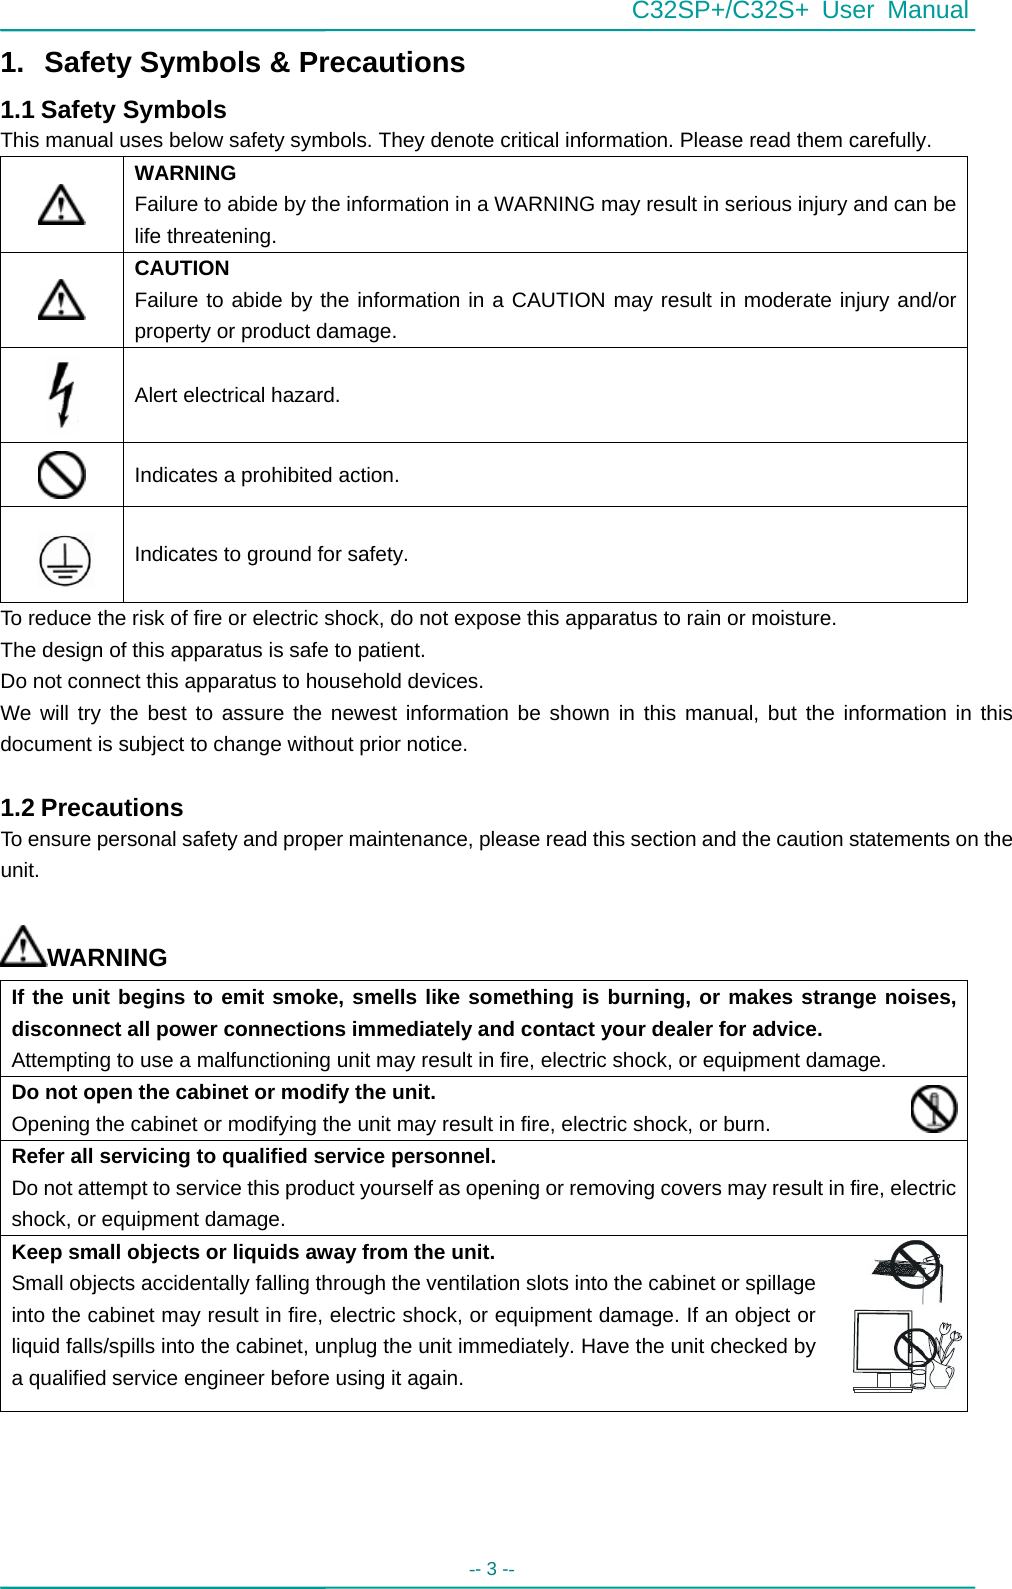 C32SP+/C32S+ User Manual -- 3 --   1.  Safety Symbols &amp; Precautions 1.1 Safety Symbols This manual uses below safety symbols. They denote critical information. Please read them carefully.  WARNING Failure to abide by the information in a WARNING may result in serious injury and can be life threatening.  CAUTION Failure to abide by the information in a CAUTION may result in moderate injury and/or property or product damage.  Alert electrical hazard.  Indicates a prohibited action.   Indicates to ground for safety. To reduce the risk of fire or electric shock, do not expose this apparatus to rain or moisture. The design of this apparatus is safe to patient. Do not connect this apparatus to household devices. We will try the best to assure the newest information be shown in this manual, but the information in this document is subject to change without prior notice.  1.2 Precautions To ensure personal safety and proper maintenance, please read this section and the caution statements on the unit.  WARNING If the unit begins to emit smoke, smells like something is burning, or makes strange noises, disconnect all power connections immediately and contact your dealer for advice. Attempting to use a malfunctioning unit may result in fire, electric shock, or equipment damage. Do not open the cabinet or modify the unit. Opening the cabinet or modifying the unit may result in fire, electric shock, or burn. Refer all servicing to qualified service personnel. Do not attempt to service this product yourself as opening or removing covers may result in fire, electric shock, or equipment damage. Keep small objects or liquids away from the unit. Small objects accidentally falling through the ventilation slots into the cabinet or spillage into the cabinet may result in fire, electric shock, or equipment damage. If an object or liquid falls/spills into the cabinet, unplug the unit immediately. Have the unit checked by a qualified service engineer before using it again. 